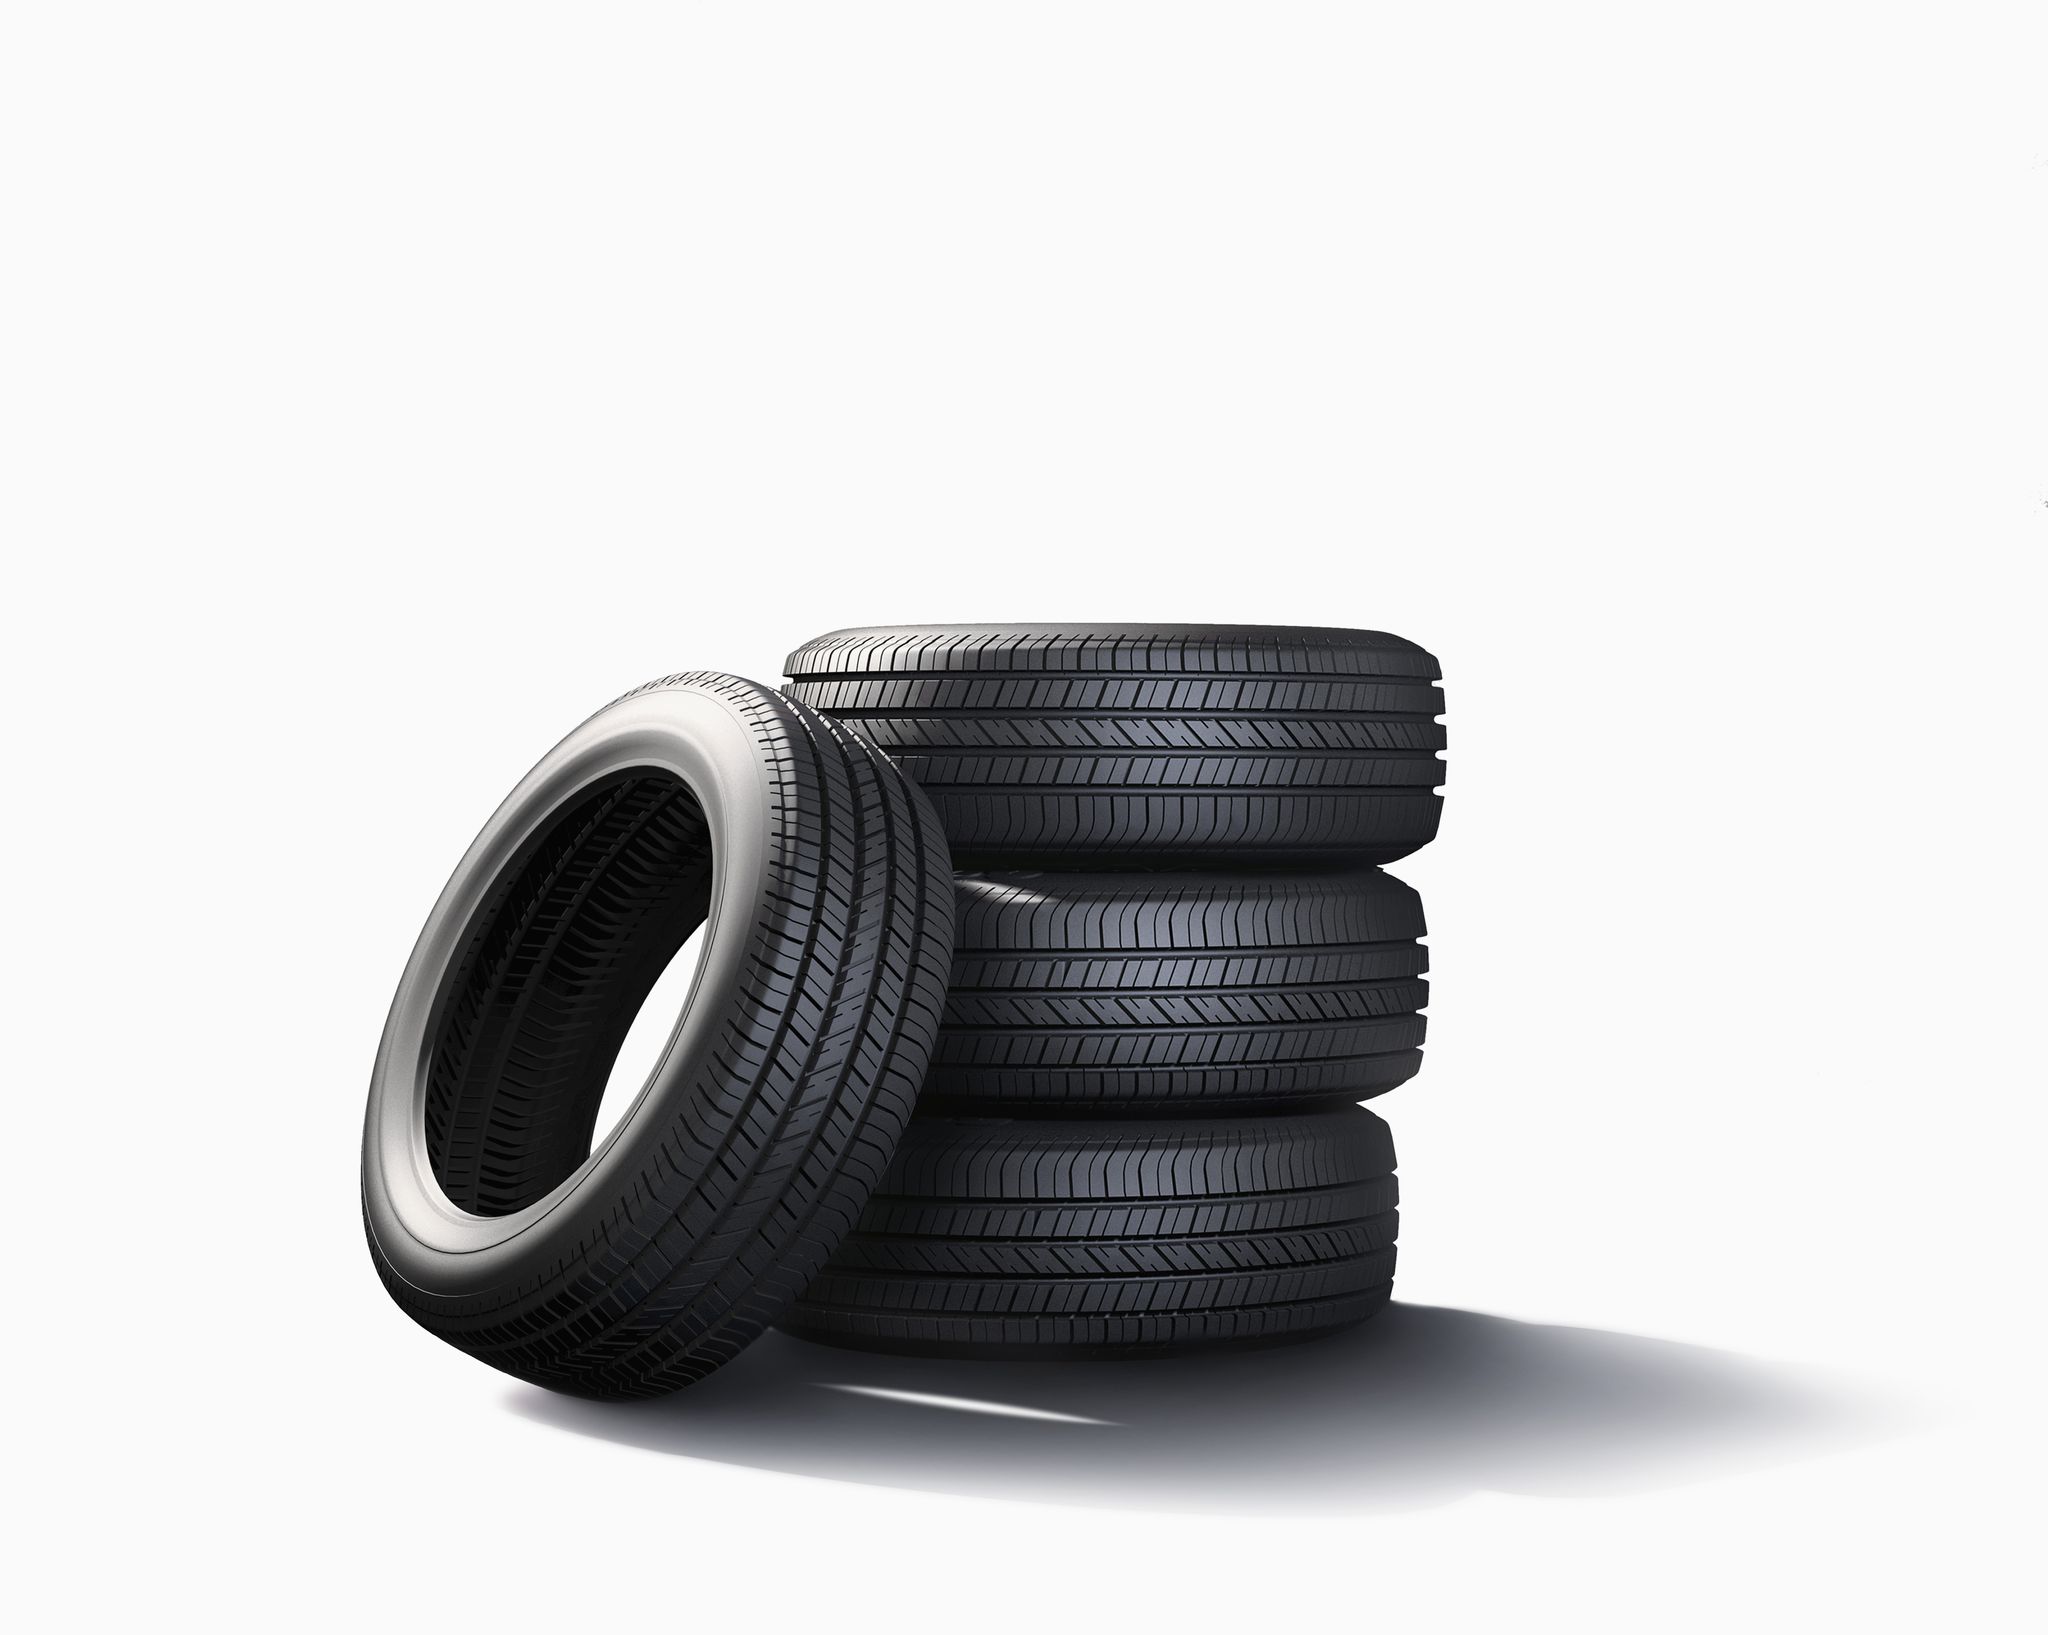 pile-of-tires-on-white-background-royalty-free-image-672151801-1561751929.jpg